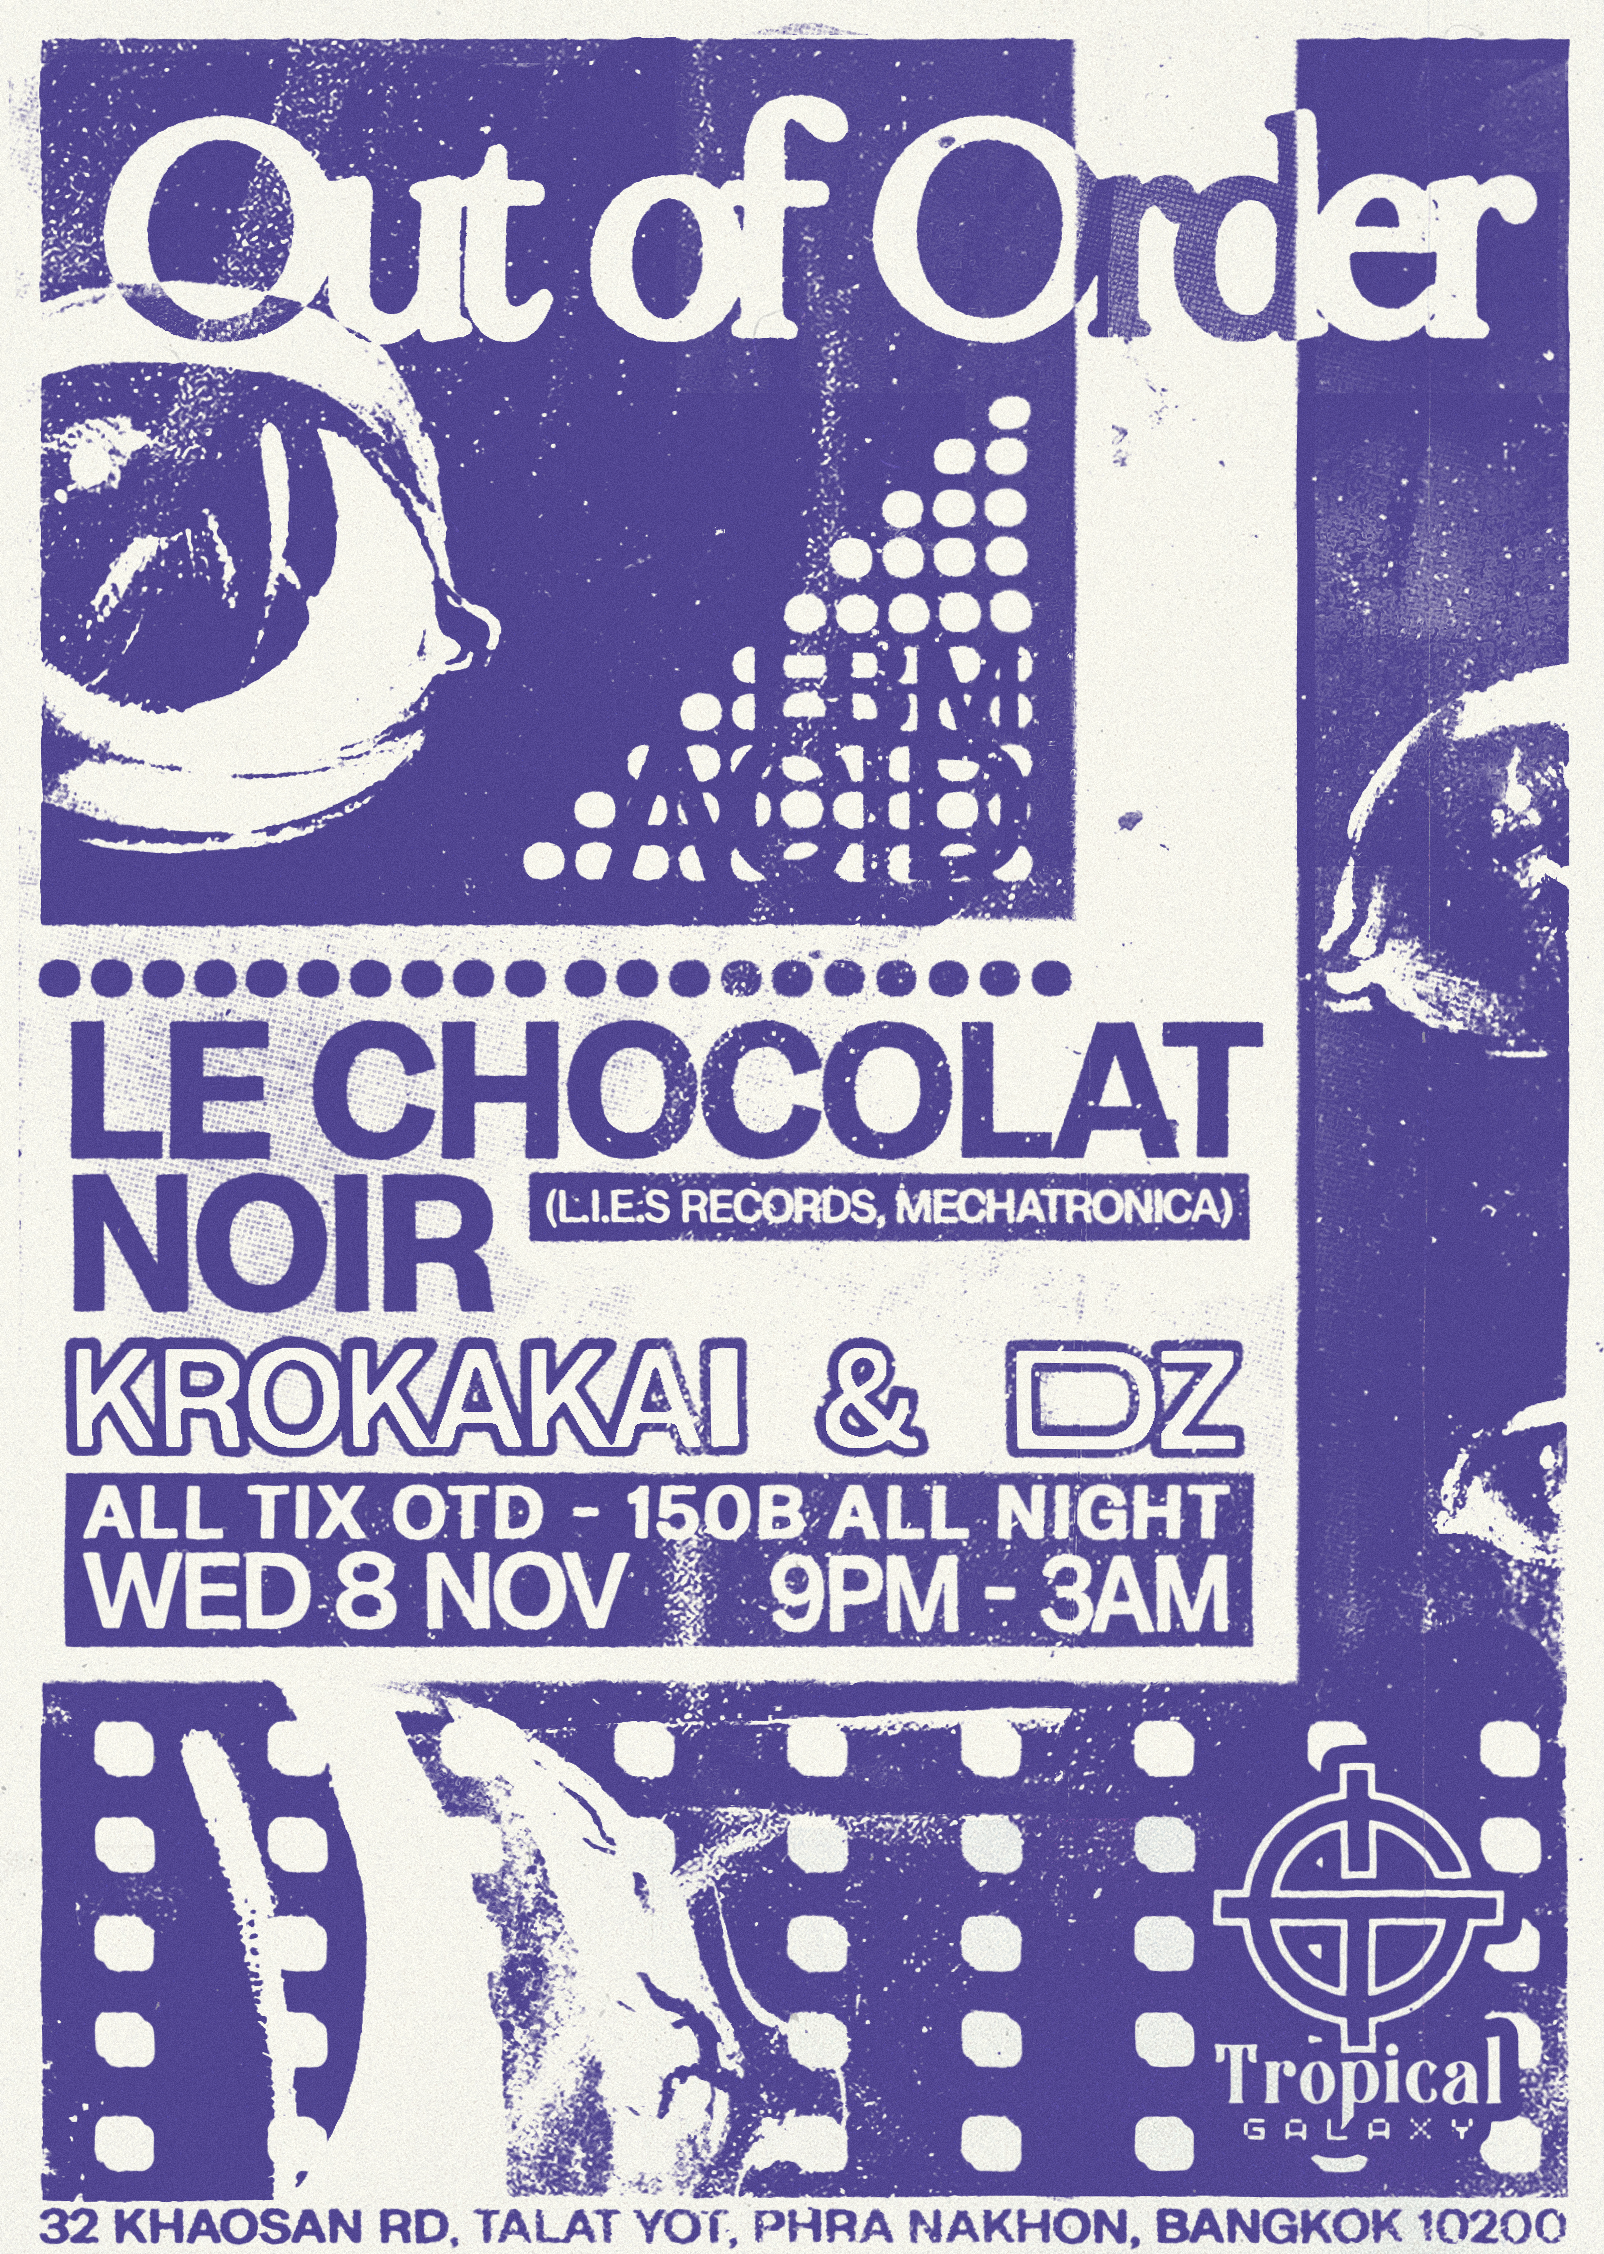 Out Of Order with Le Chocolat Noir (L.I.E.S., Mechatronica), DZ & Krokakai - フライヤー表